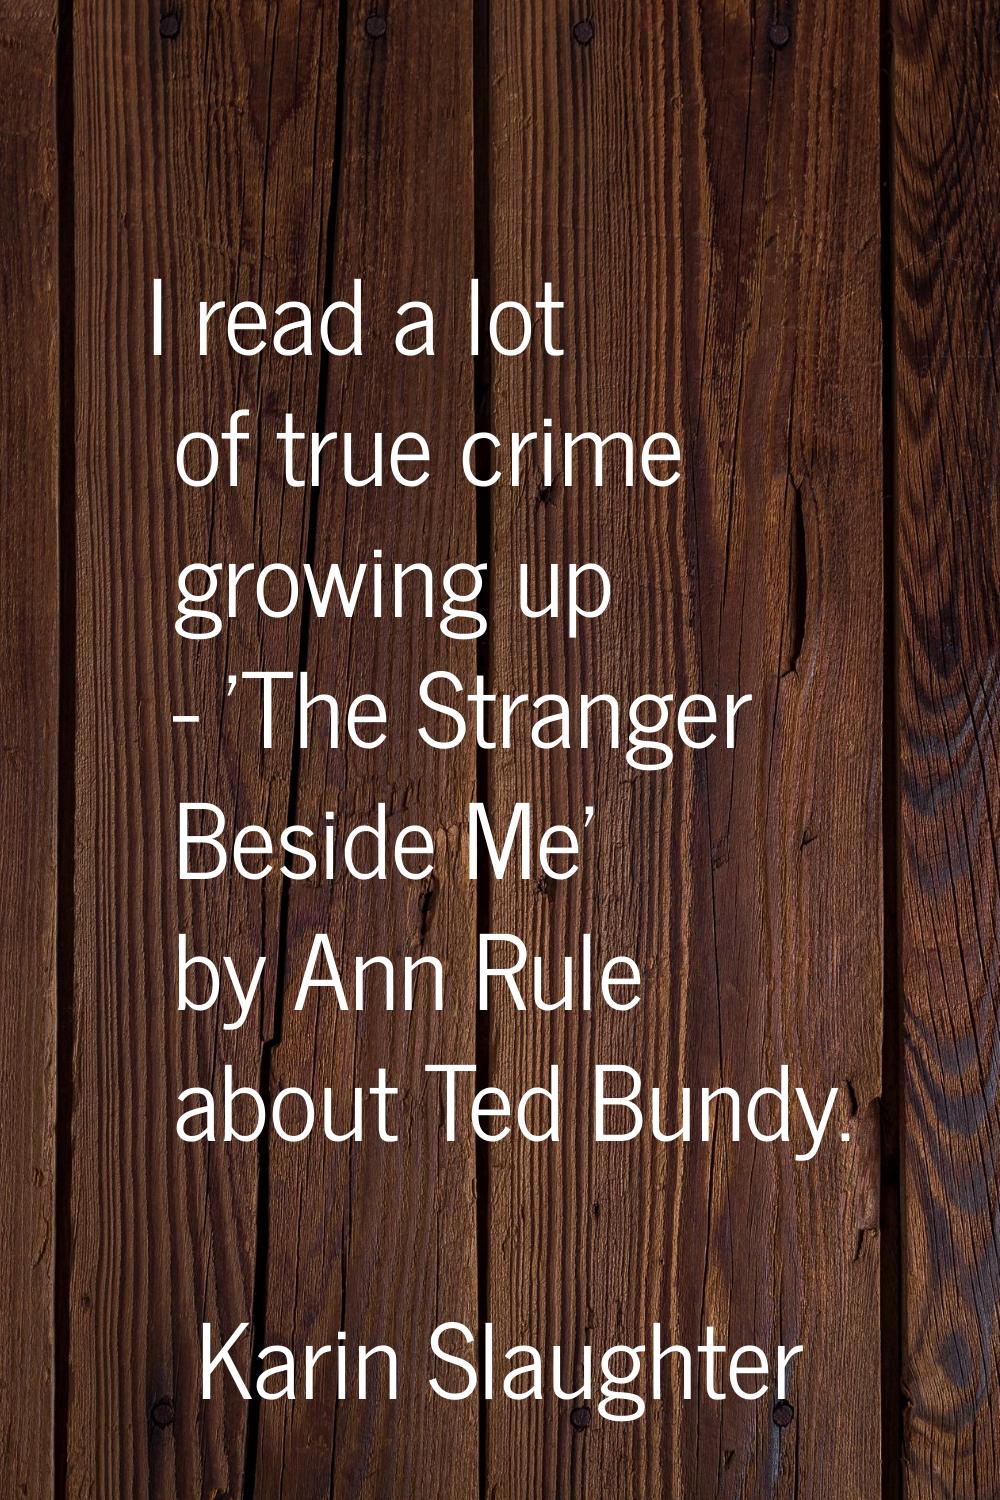 I read a lot of true crime growing up - 'The Stranger Beside Me' by Ann Rule about Ted Bundy.